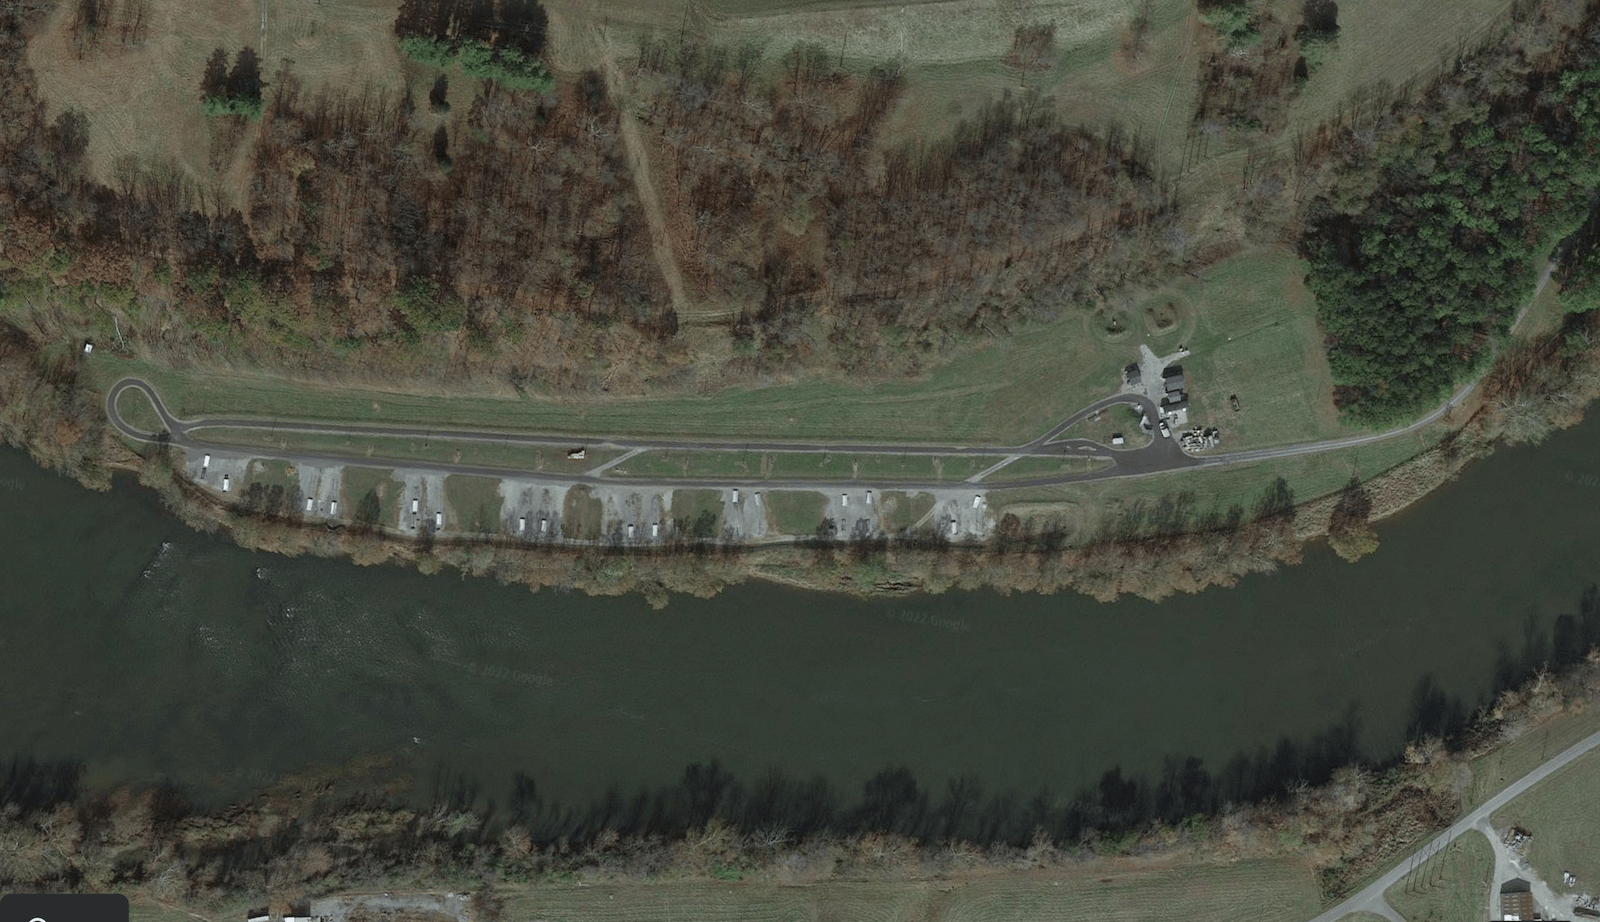 An aerial view of concrete pads next to a river